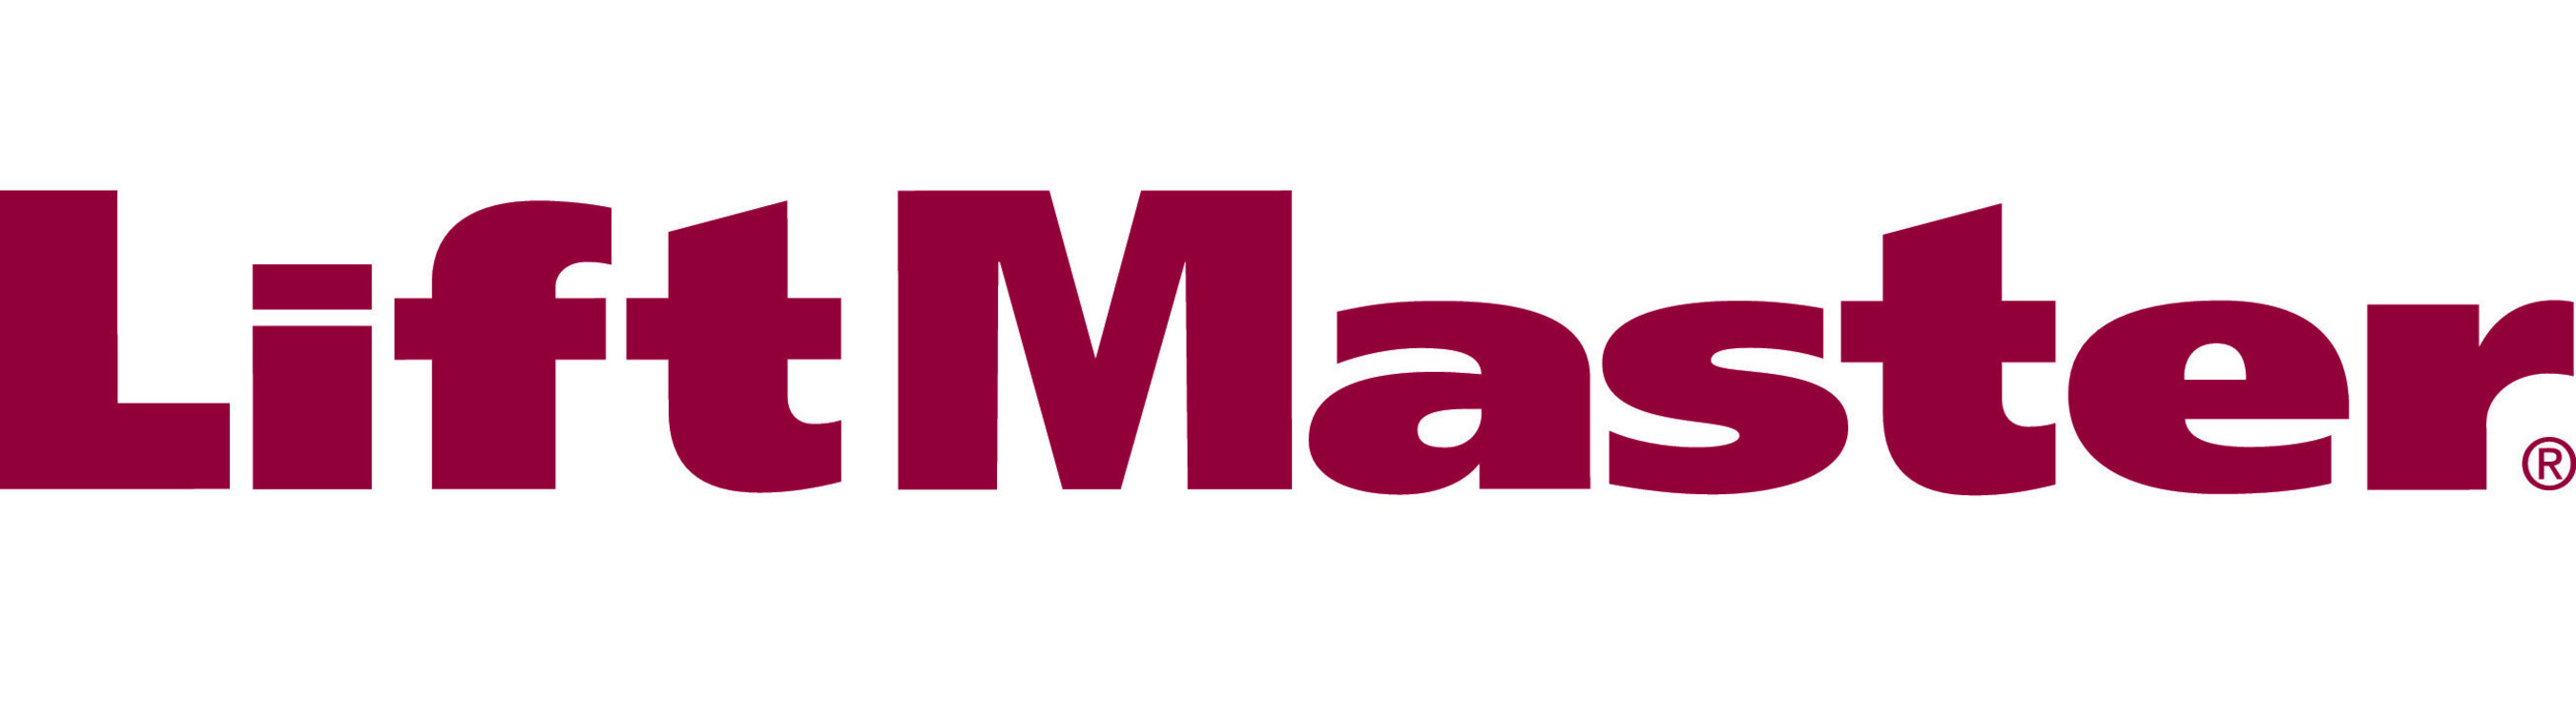 LiftMaster is the number one brand of professionally installed residential garage door openers.